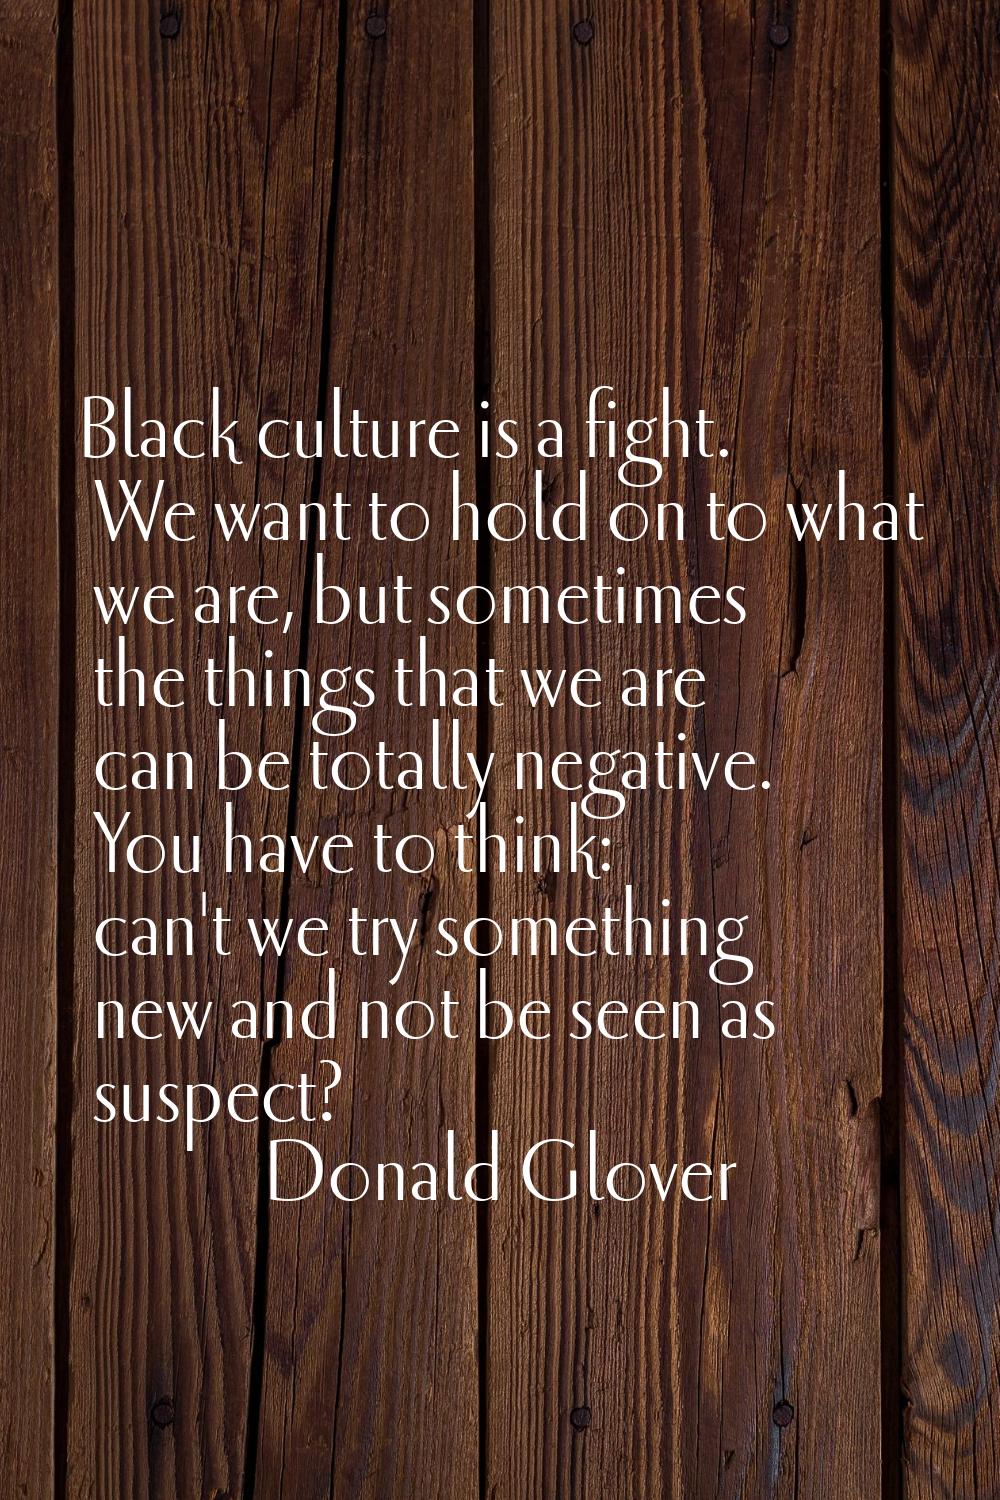 Black culture is a fight. We want to hold on to what we are, but sometimes the things that we are c